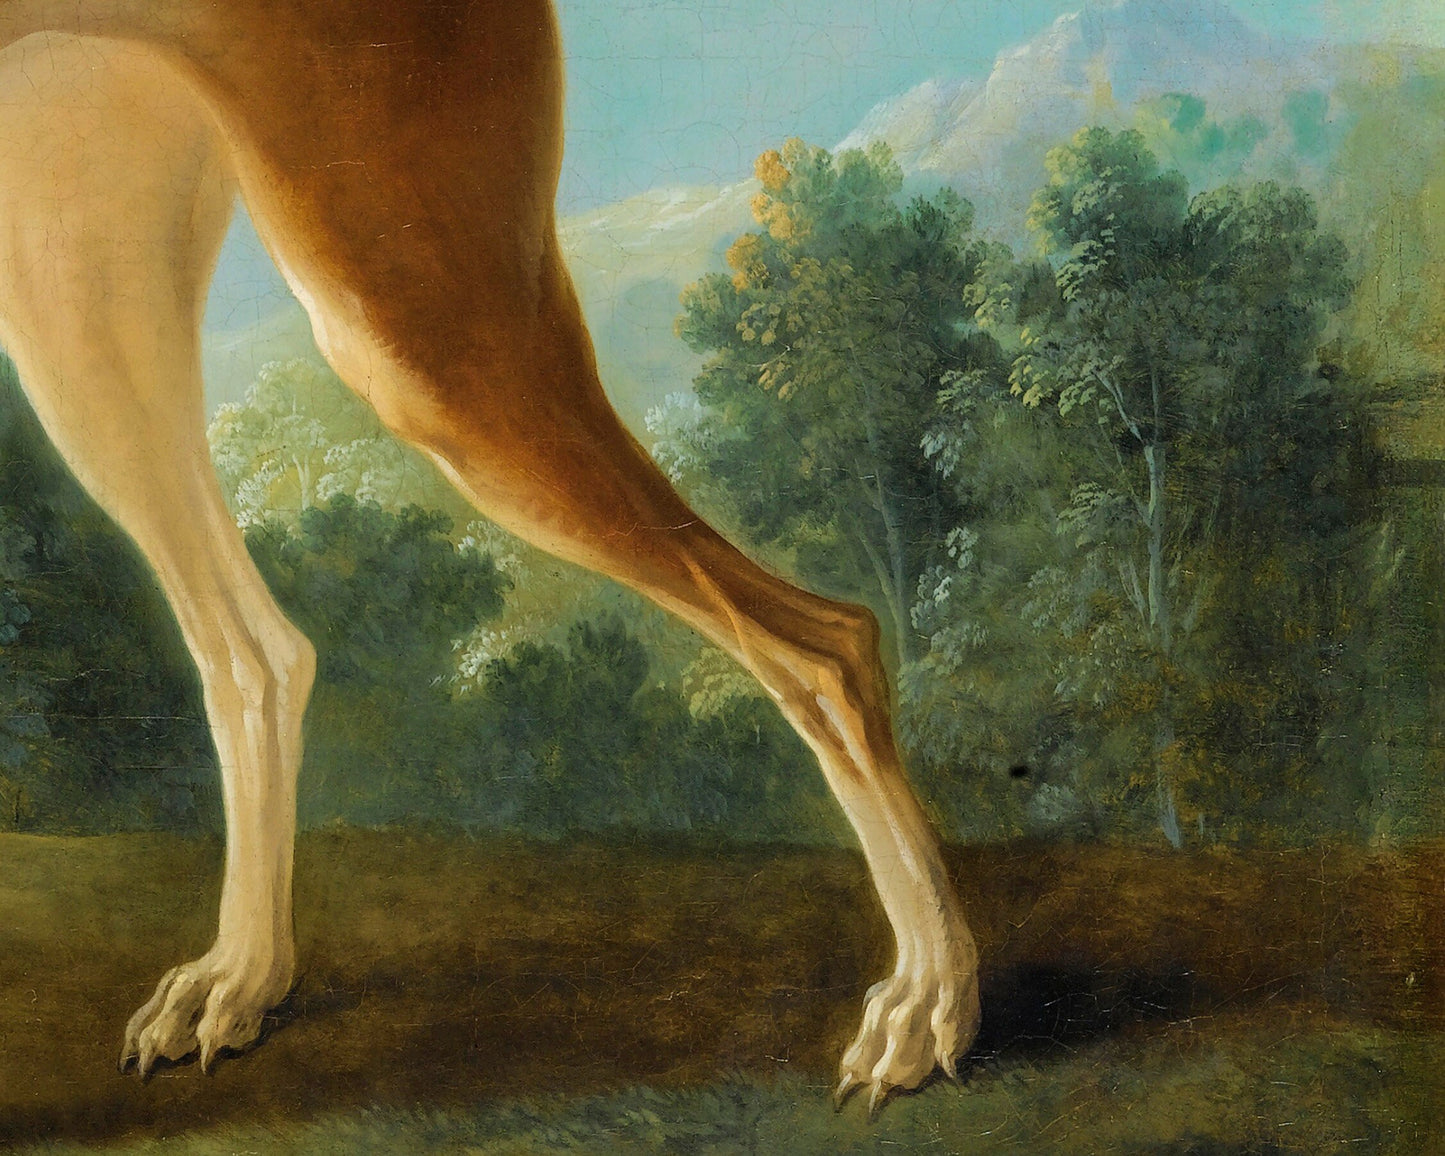 Vintage dog portrait | Greyhound in a landscape | Canine in nature wall art  | Antique animal art | French artist | Jean-Baptiste Oudry